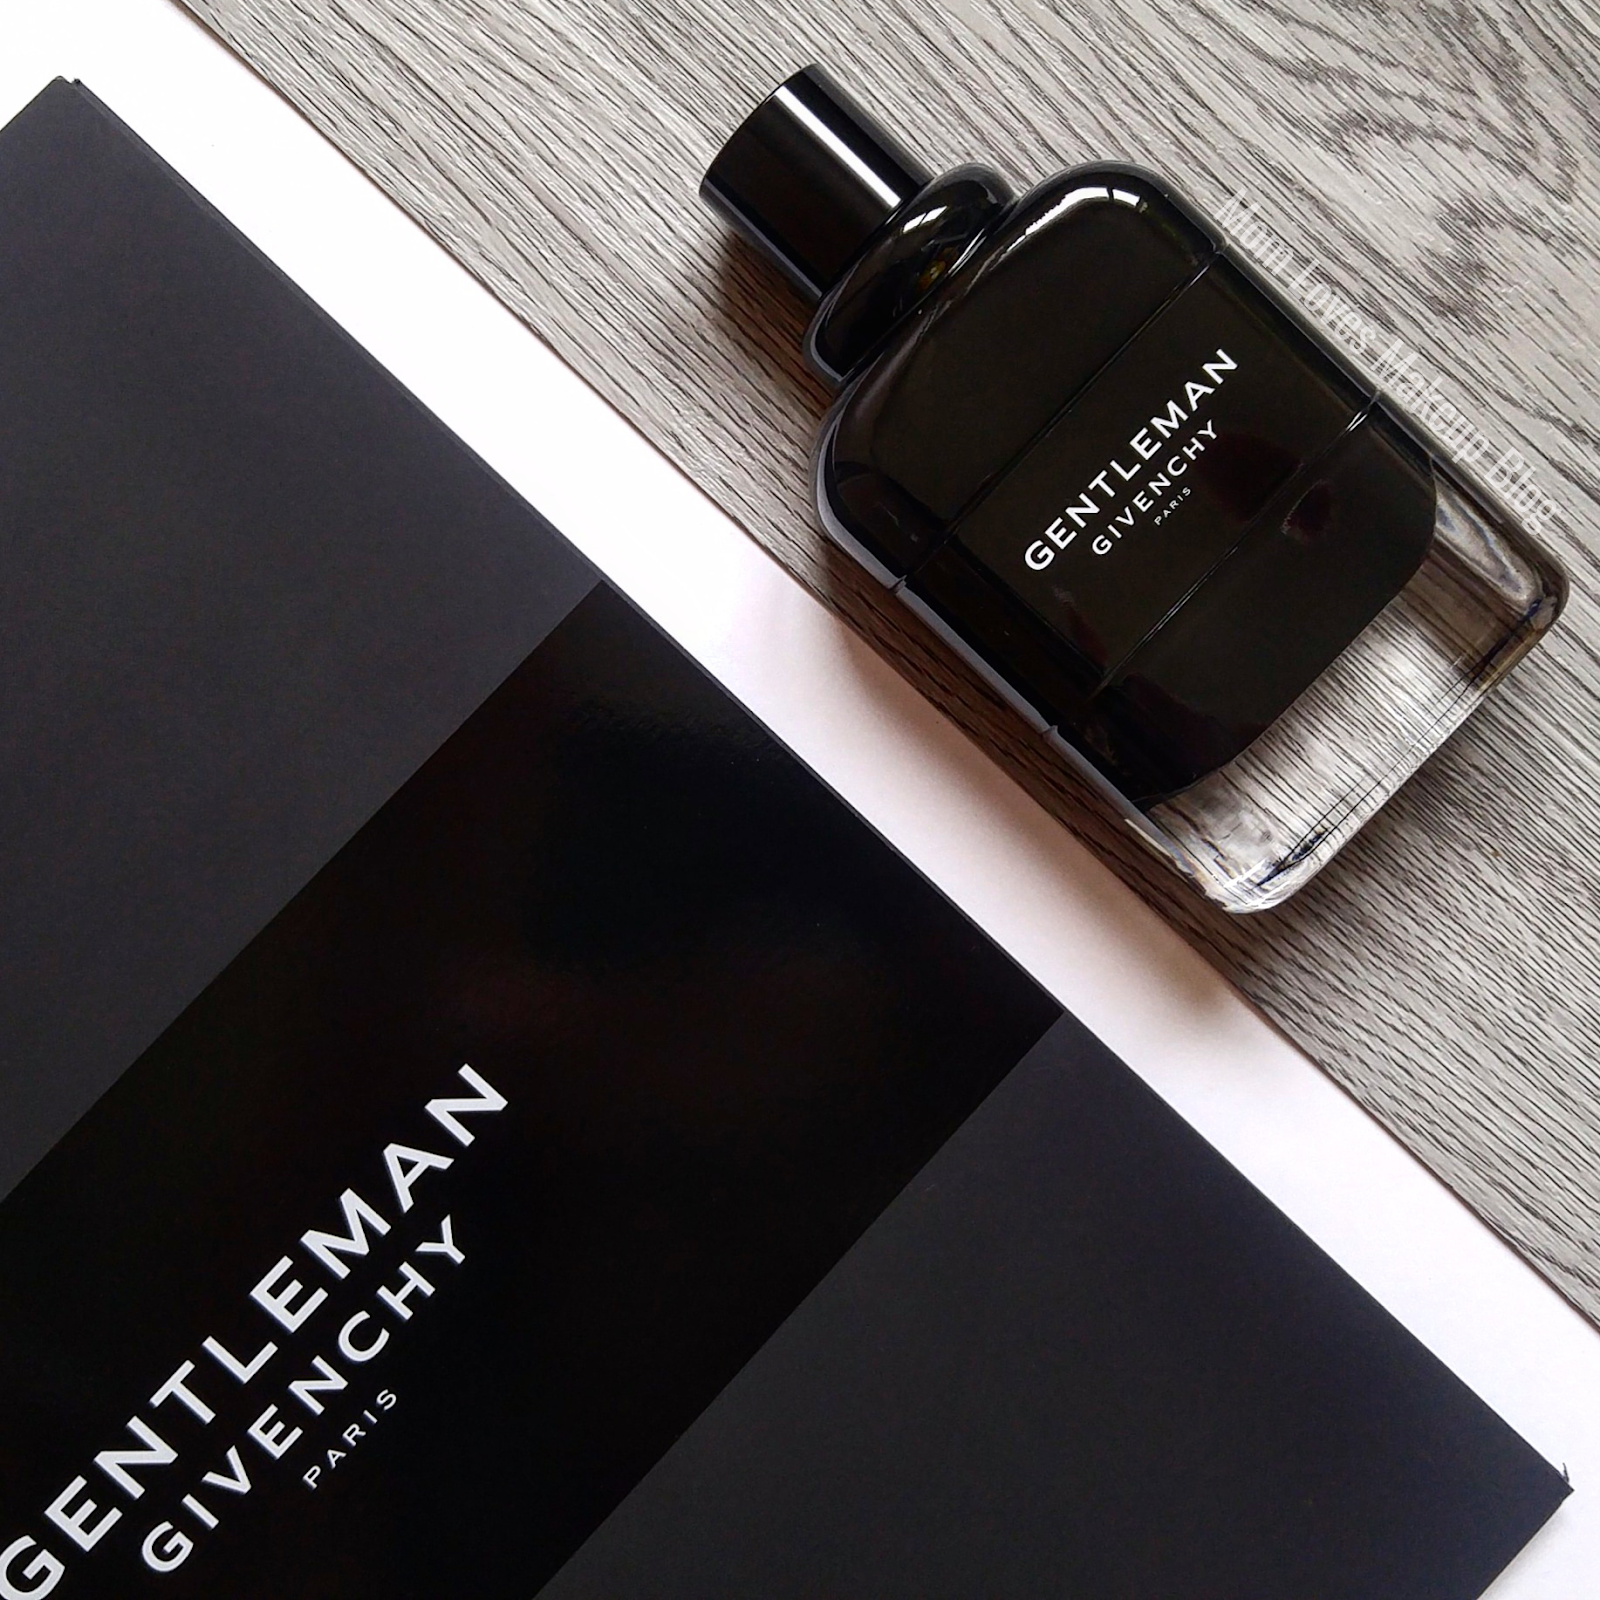 gentleman givenchy edp review